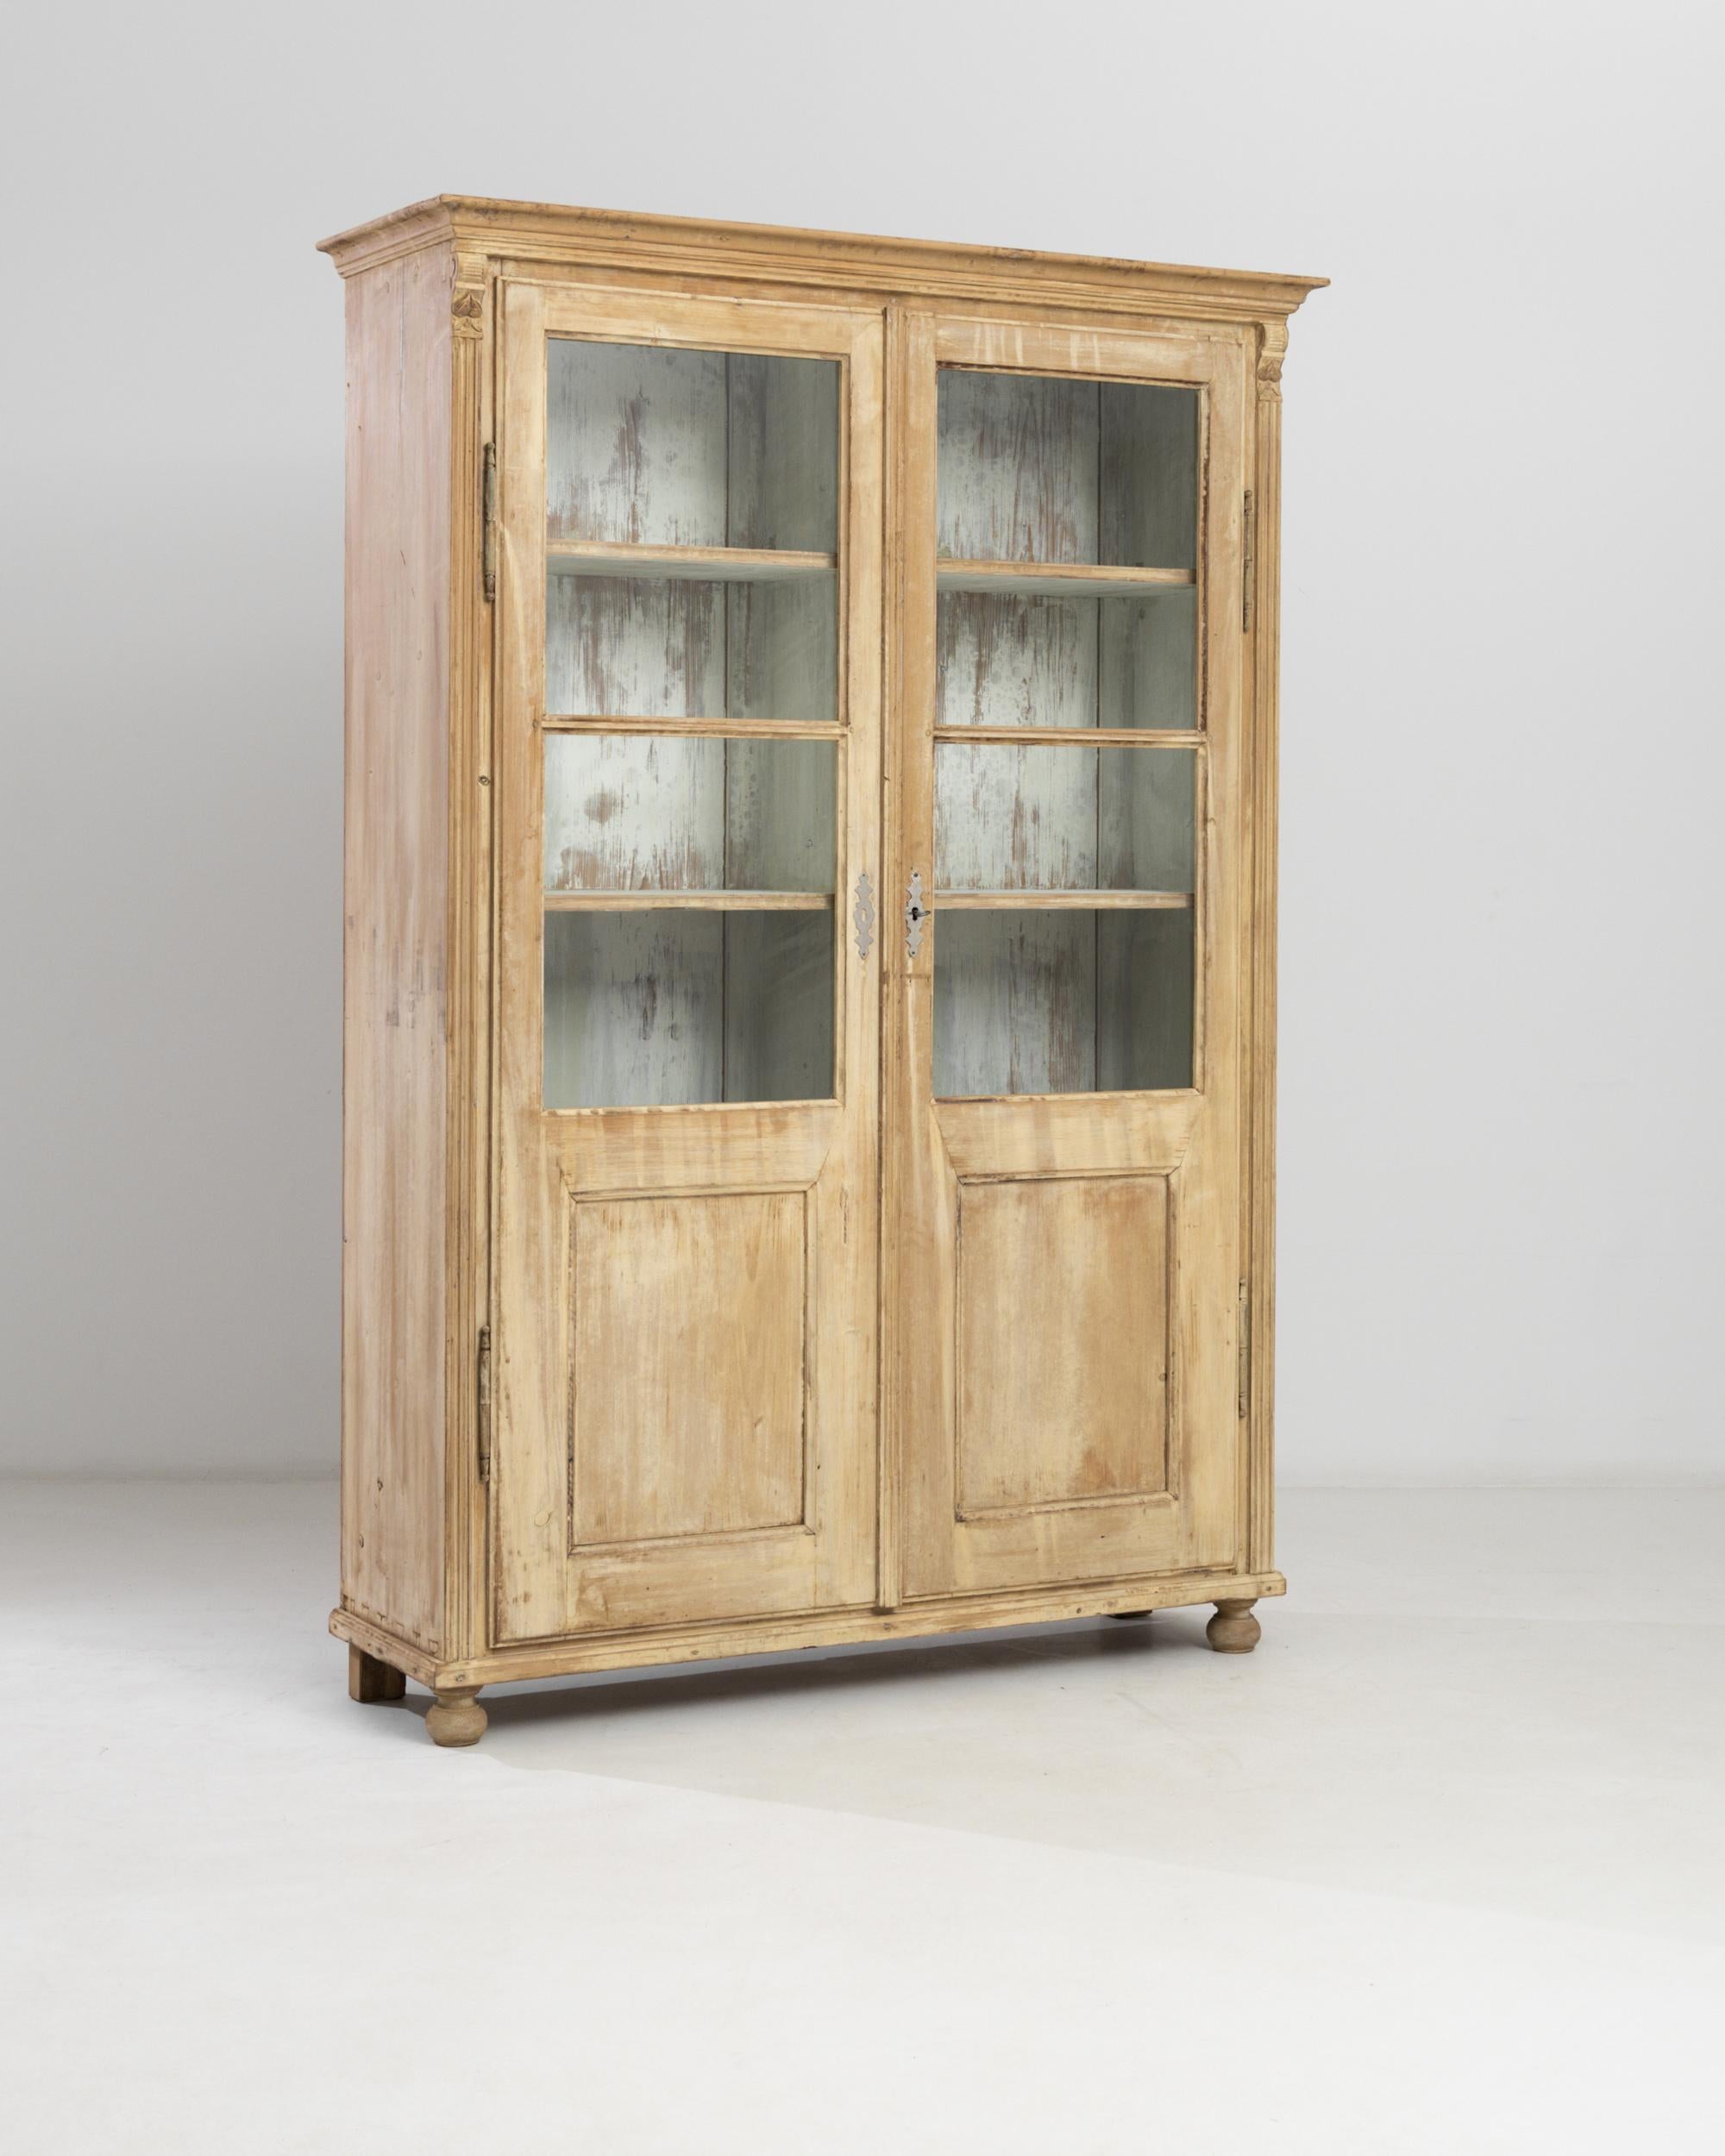 European 19th Century Central Europe Wooden Patinated Vitrine